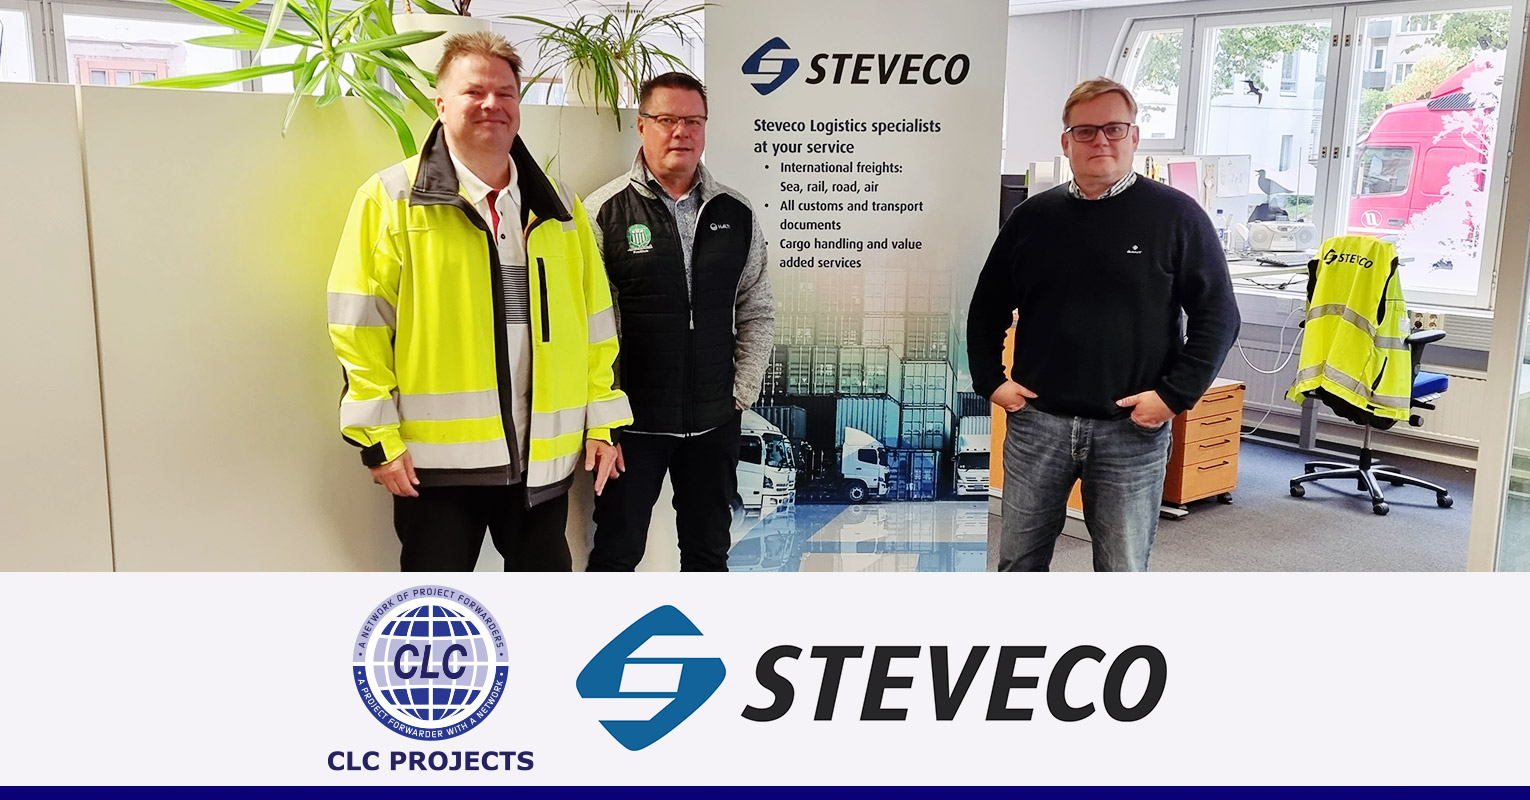 CLC Projects met with the managers at Finnish company Steveco Oy in PORT of Kotka, Finland. We surveyed the large port both for import and export and transit to/from Russia